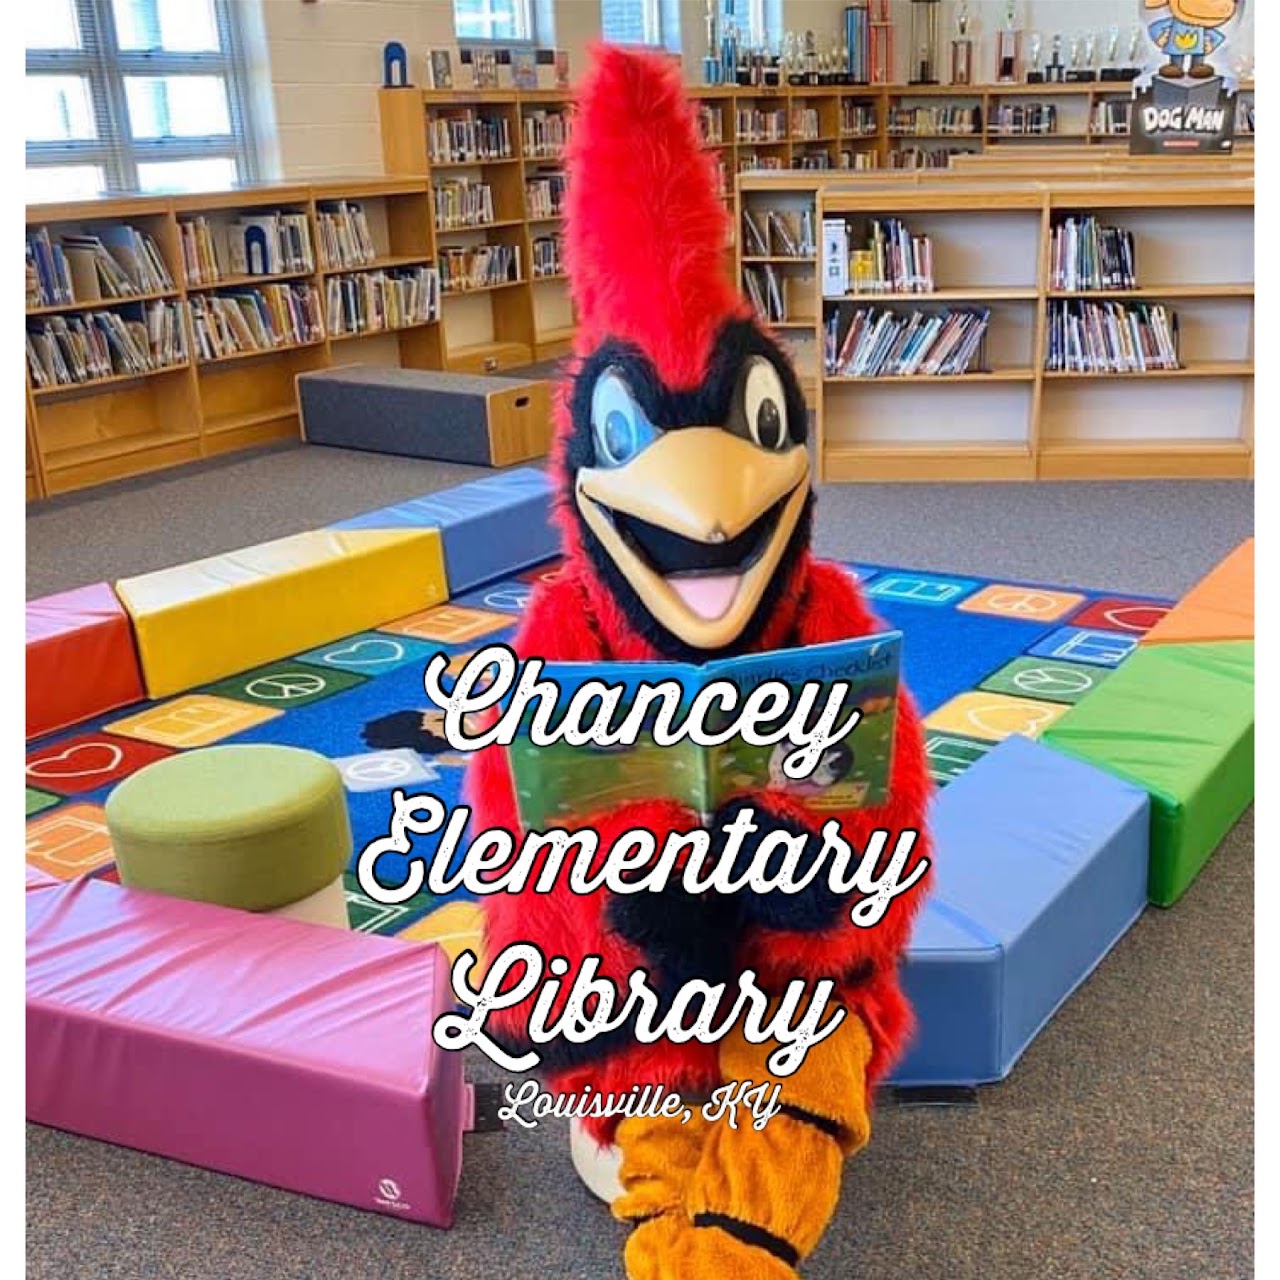 school mascot in the library